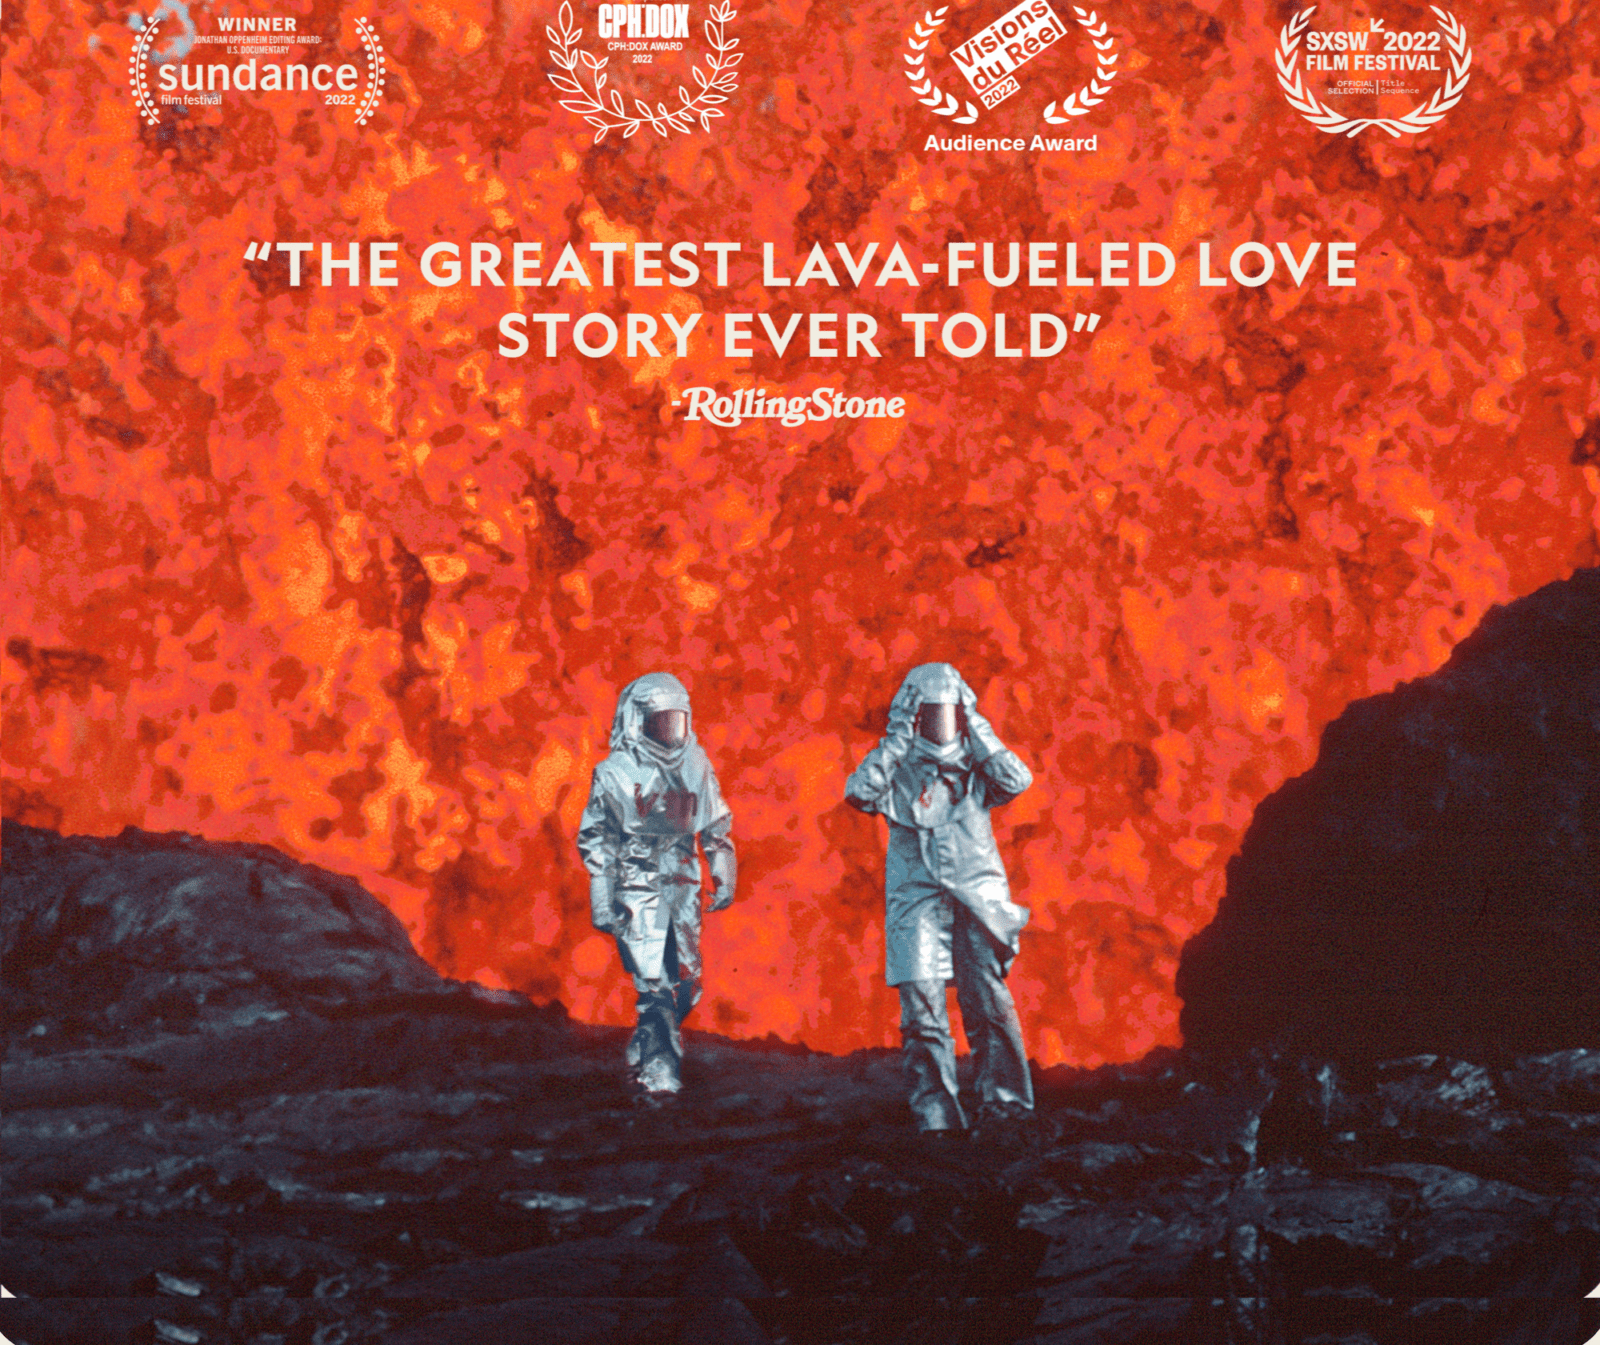 Two human figures in thermal suits walking with spewing orange lava behind them